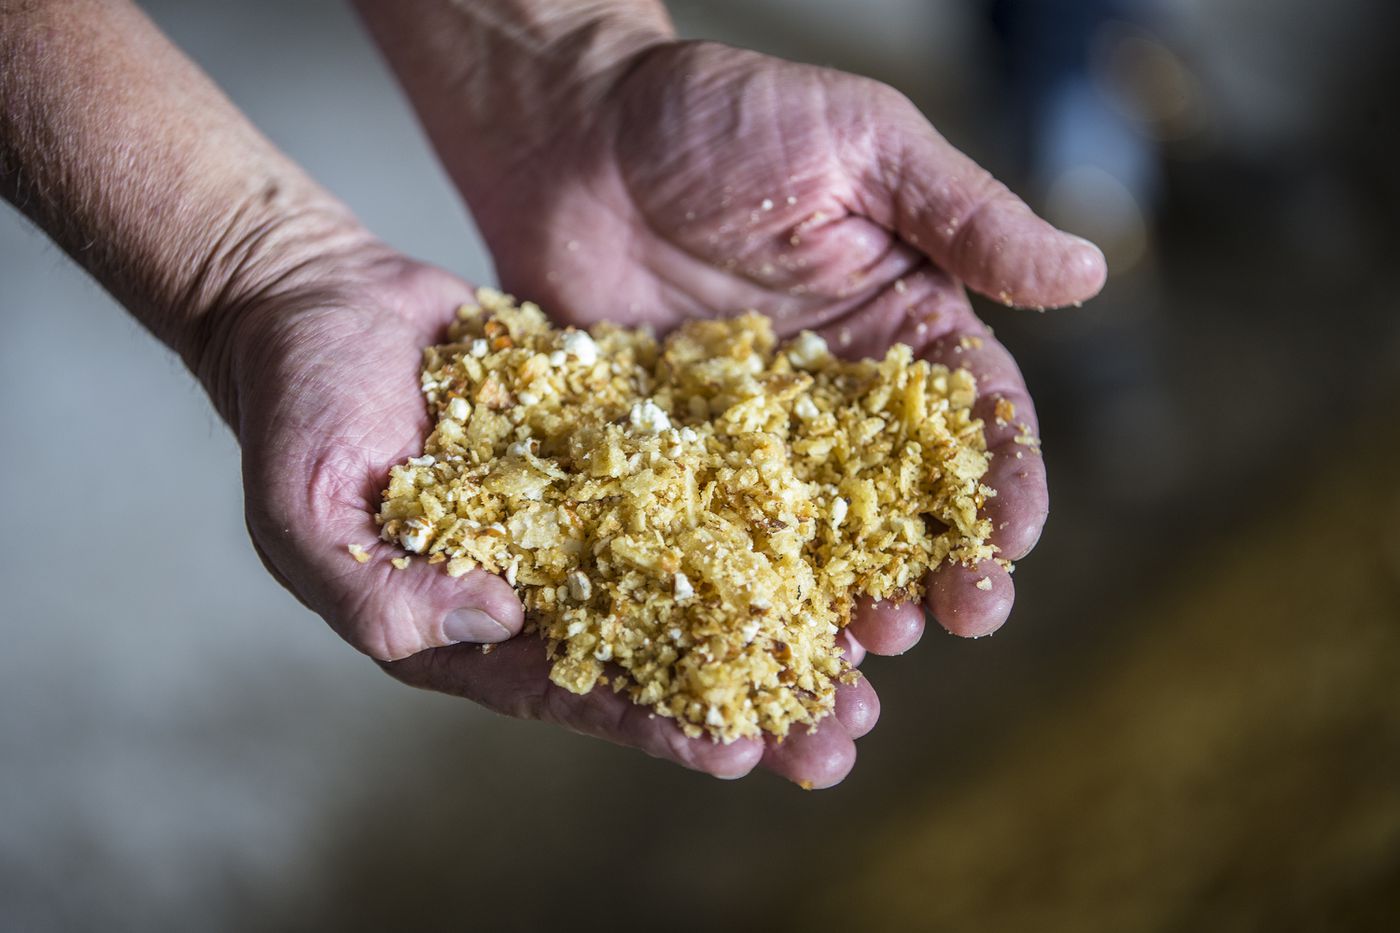 Dennis Byrne, Herr Angus Farms manager, holds the mix of potato chips, corn chips, popcorn, peanuts, and cheese curls that are mashed up and added to the hay. (MICHAEL BRYANT / Staff Photographer)